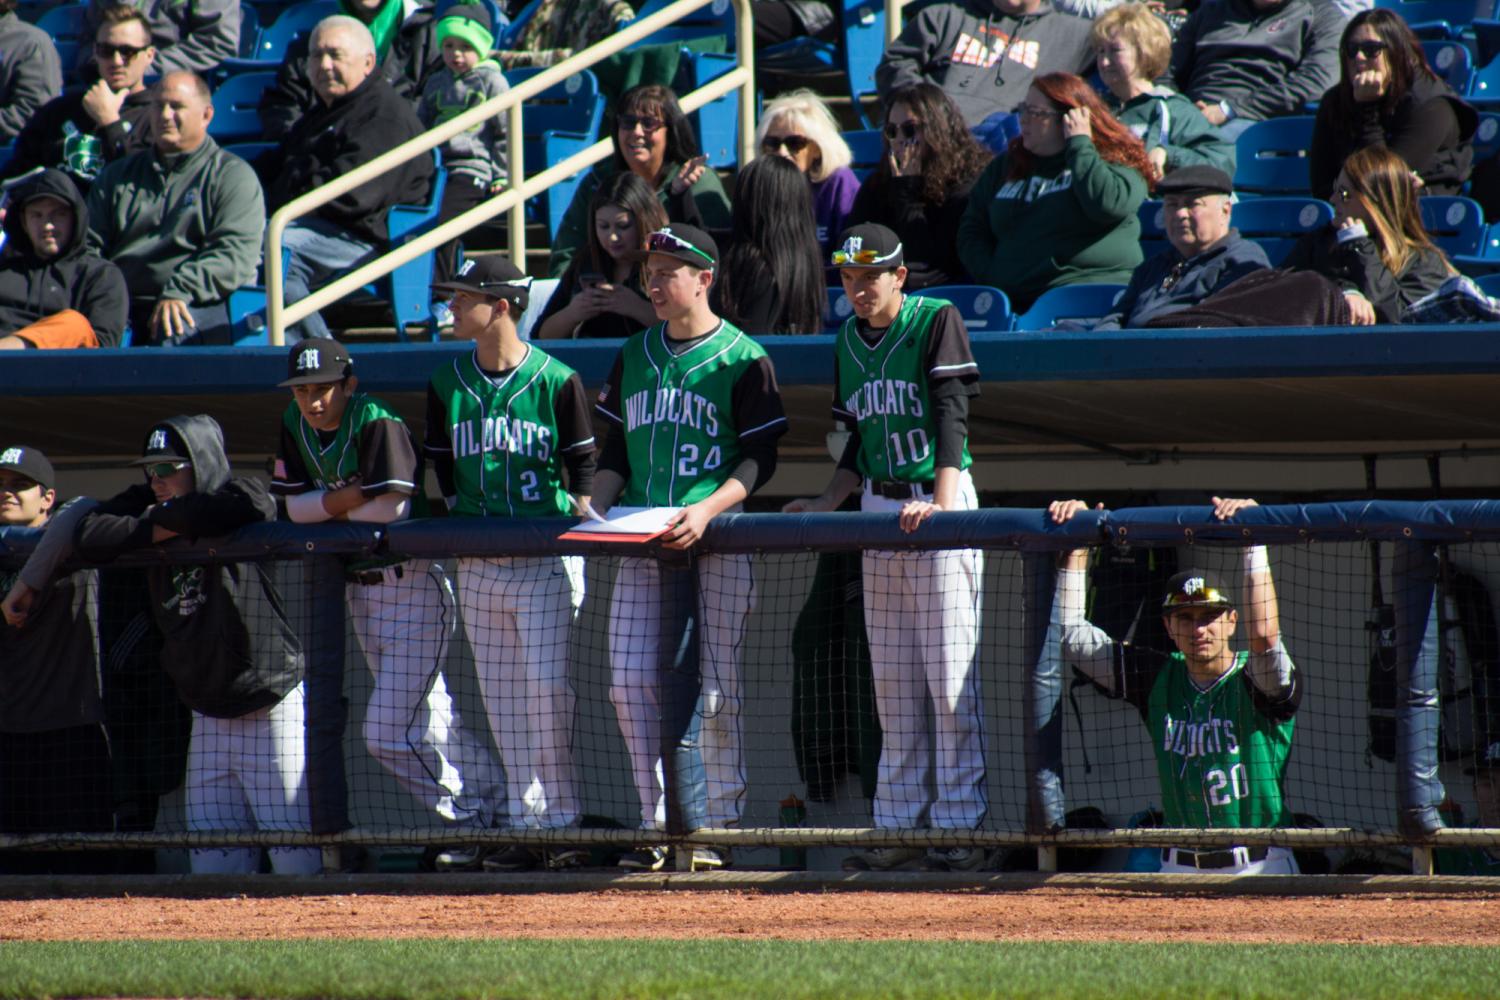 GALLERY: Mayfield Baseball vs Twinsburg at Classic Park